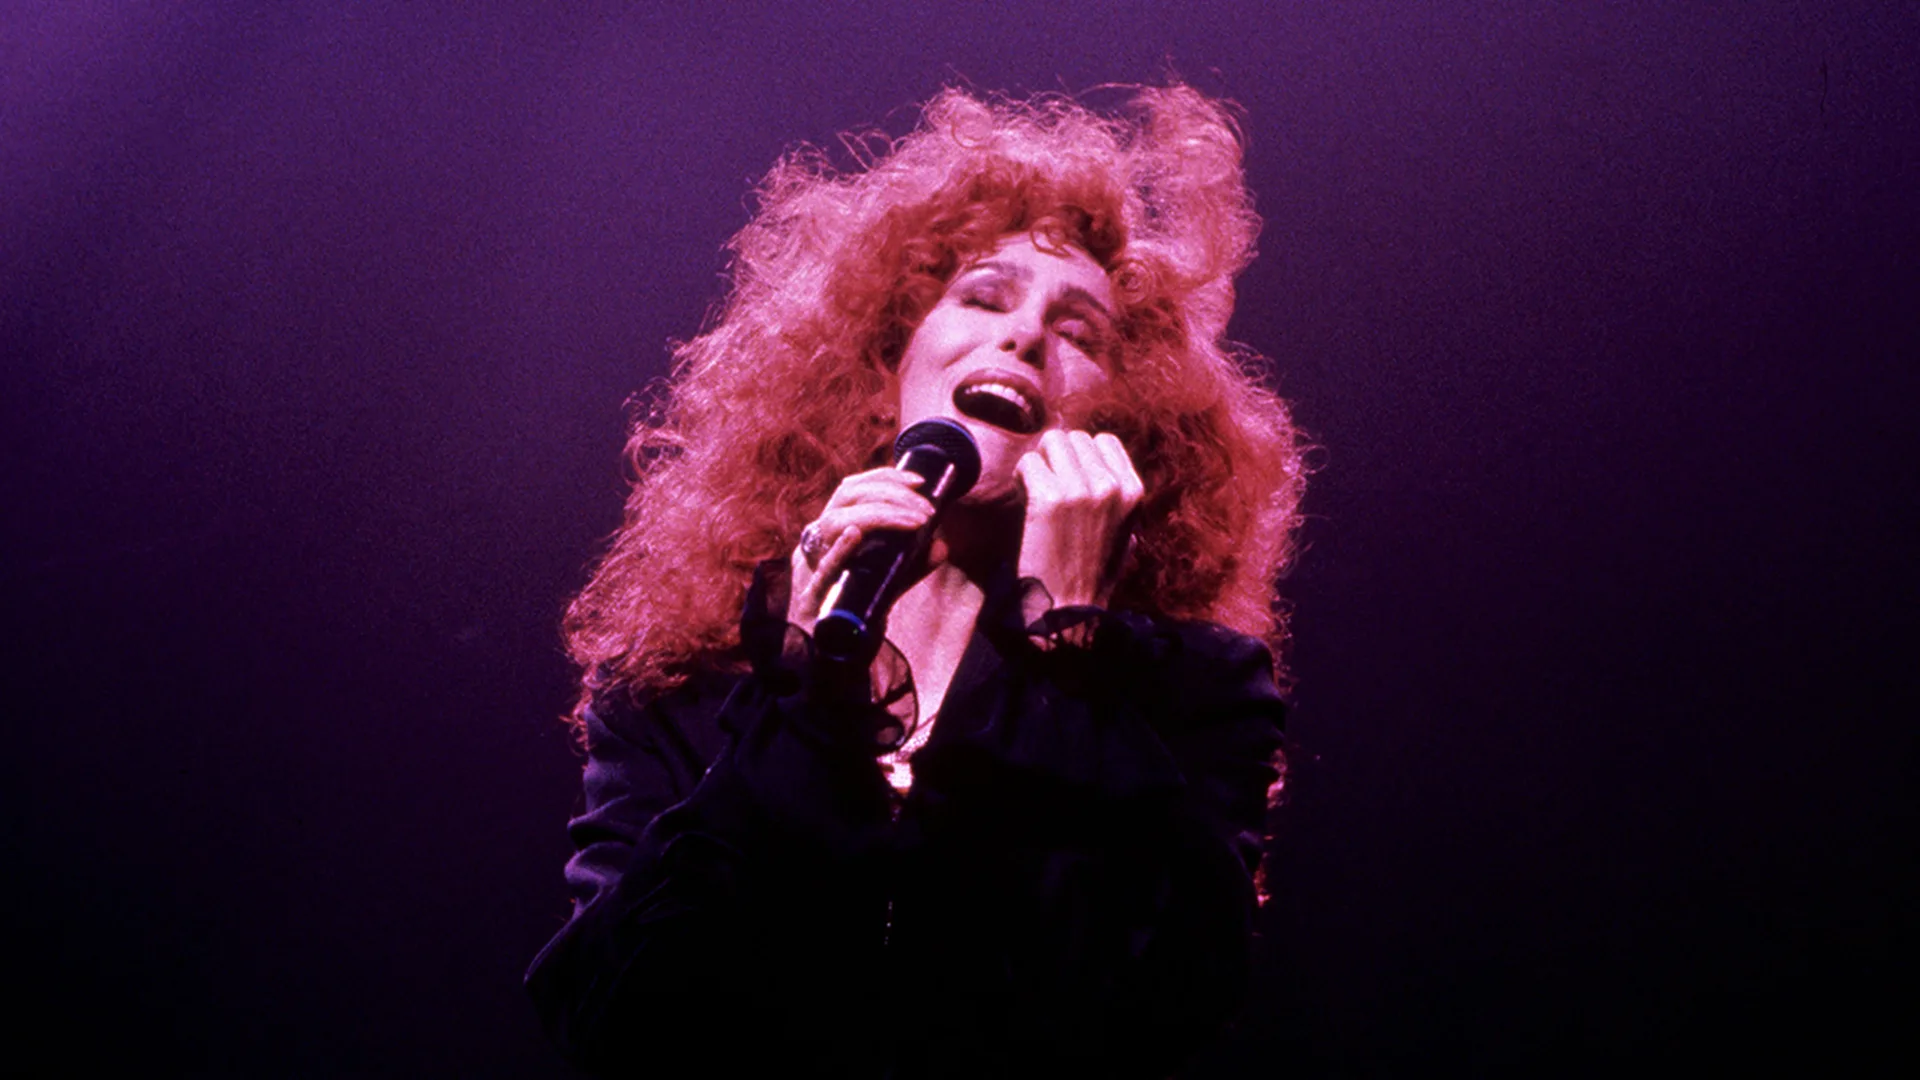 Cher performing on stage